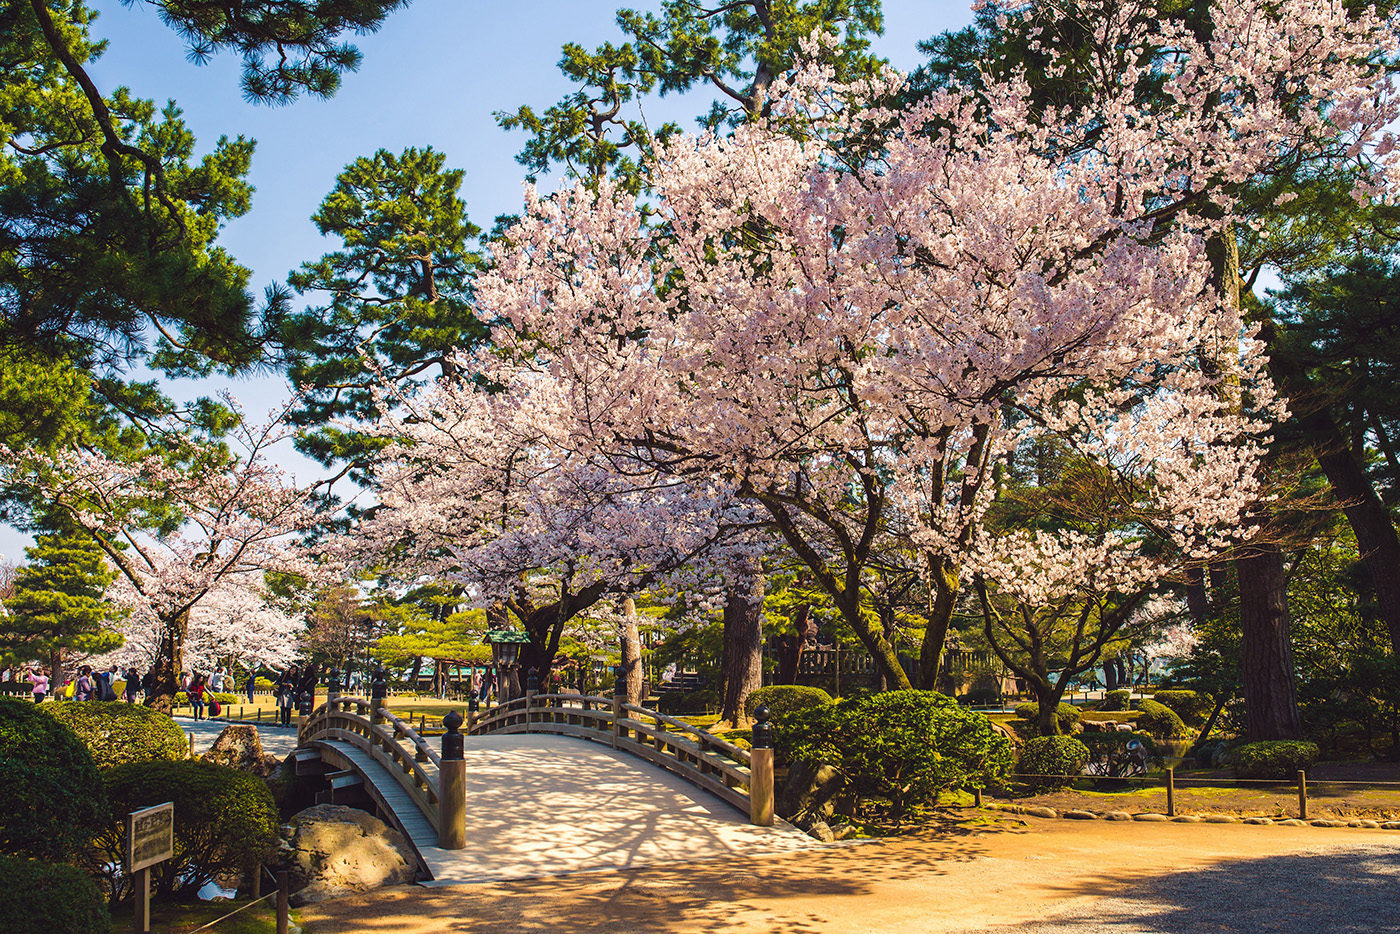 Explore cherry blossom spots, tea houses, and groves of twisted ancient trees in Kanazawa